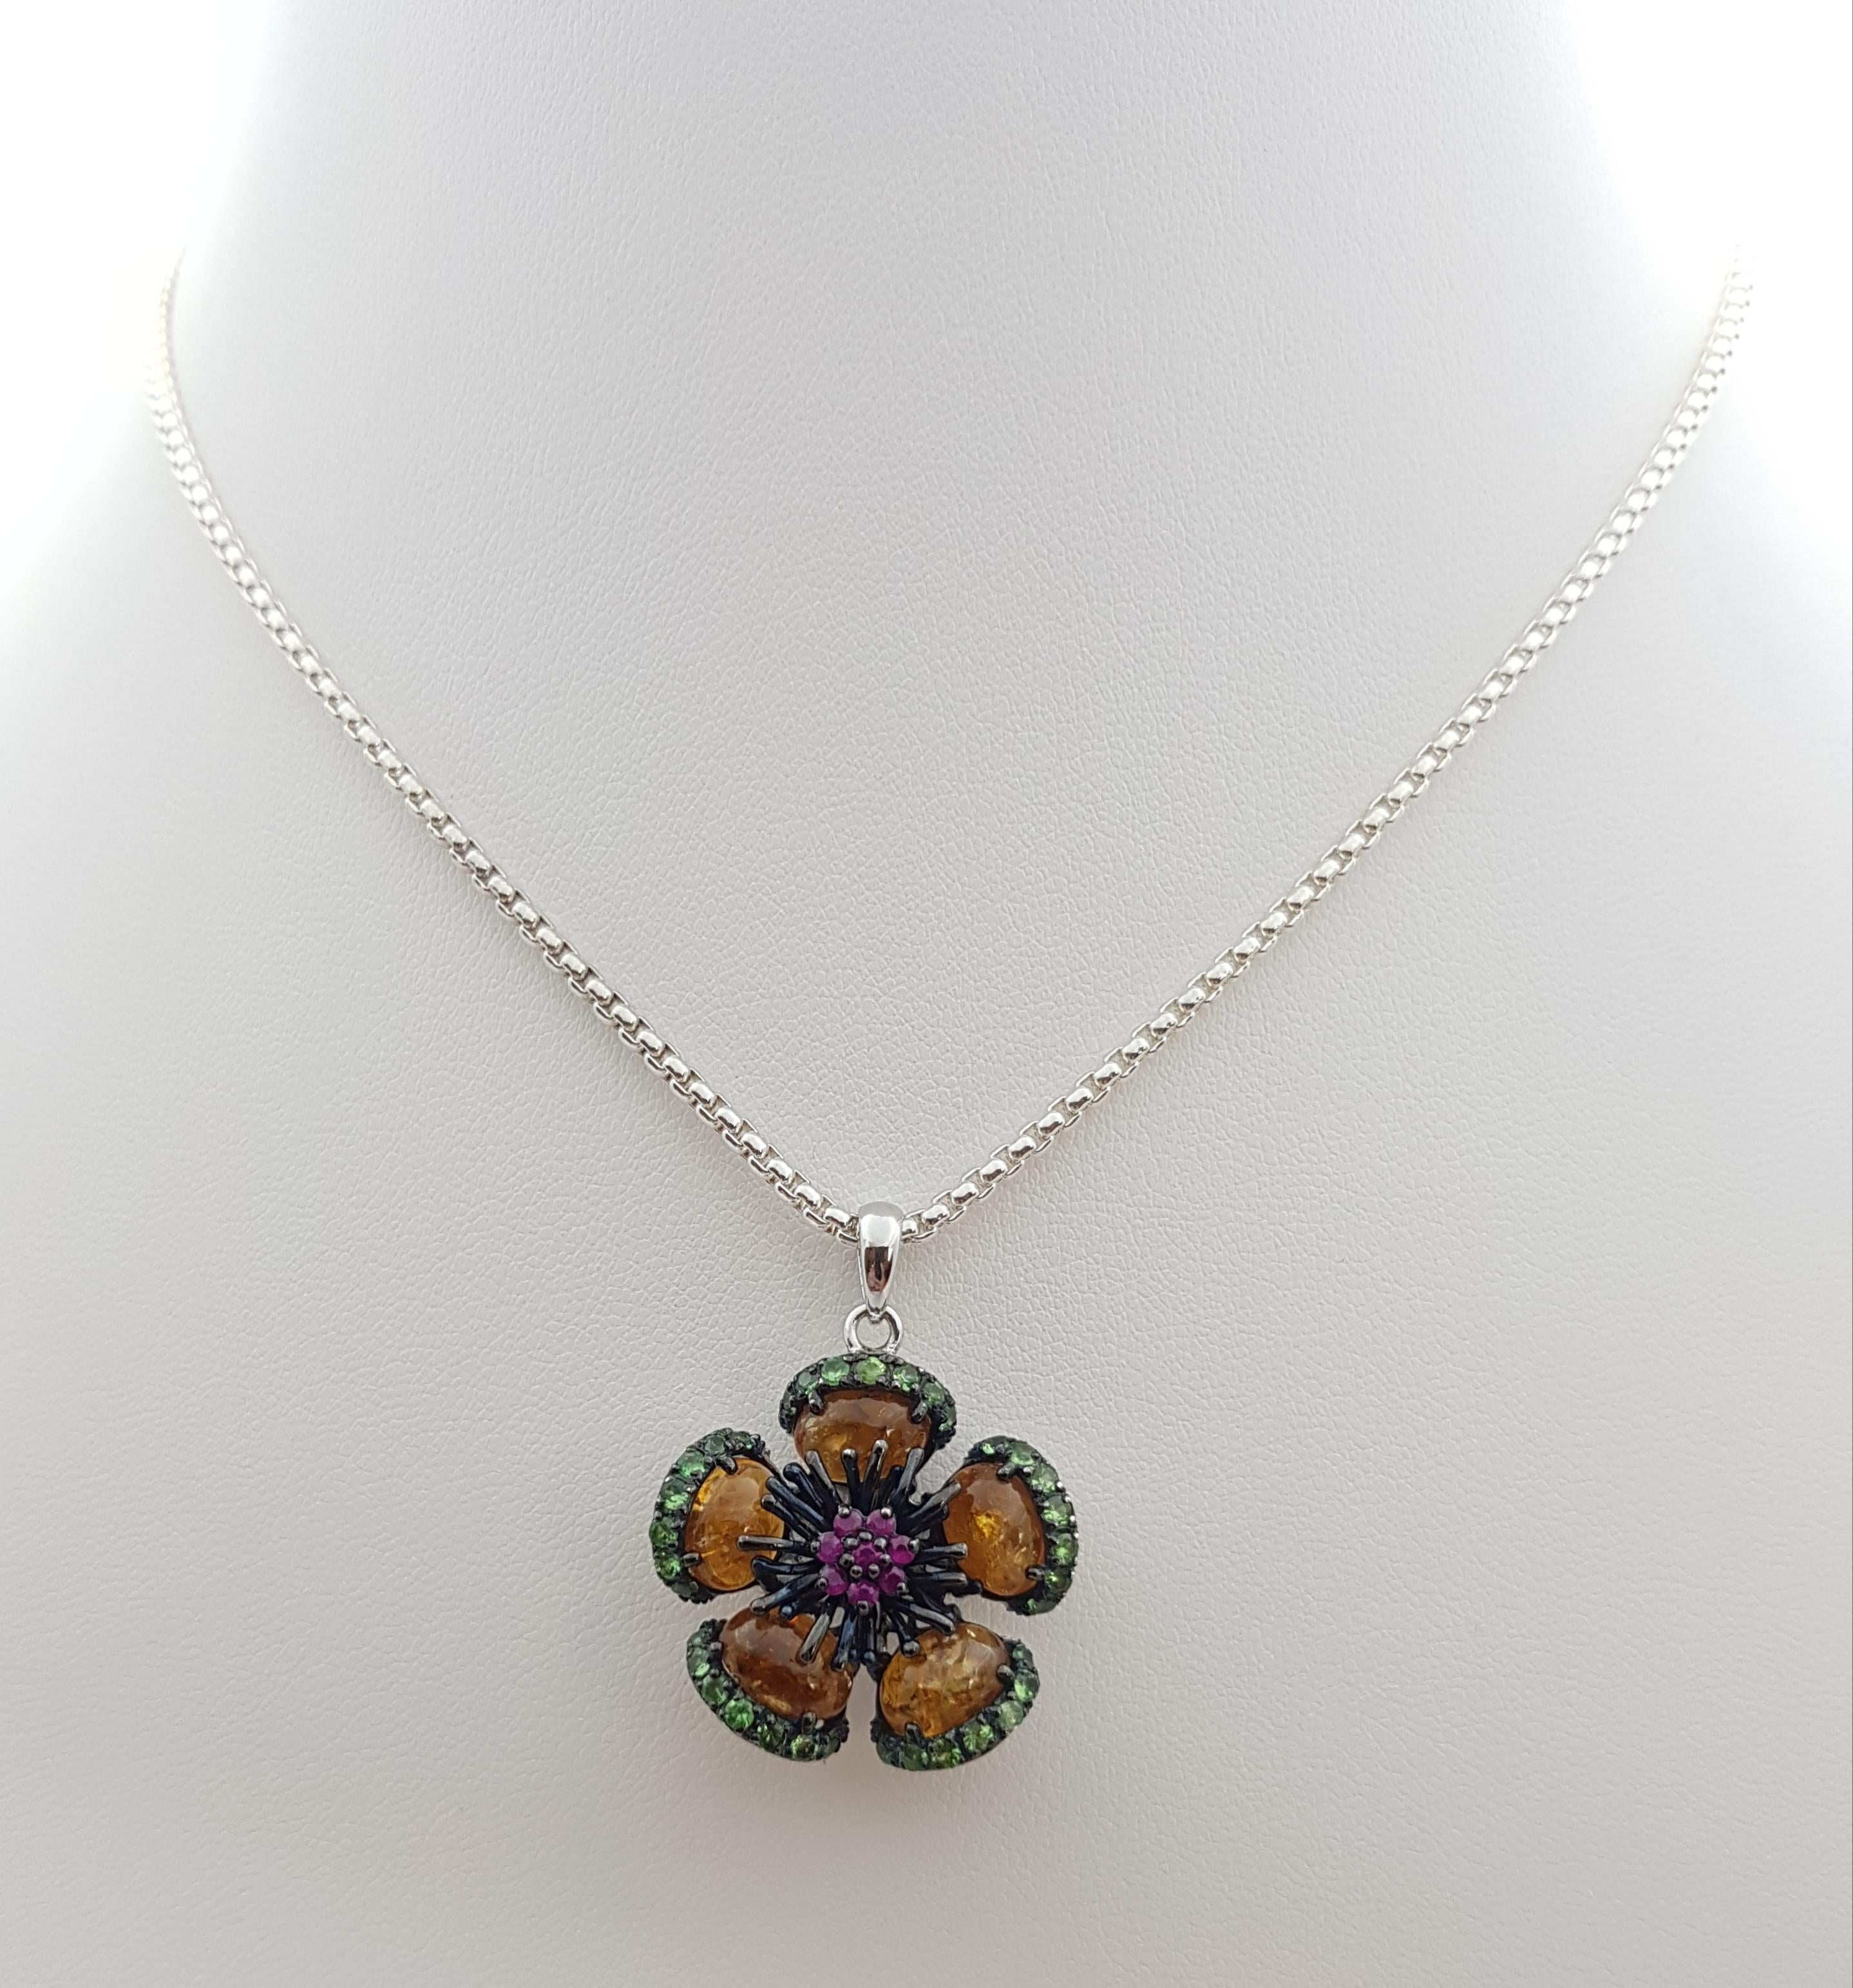 Tourmaline, Tsavorite and Ruby Pendant set in Silver Settings
(chain not included)

Width: 2.5 cm 
Length: 3.2 cm
Total Weight: 6.77  grams

*Please note that the silver setting is plated with rhodium to promote shine and help prevent oxidation. 